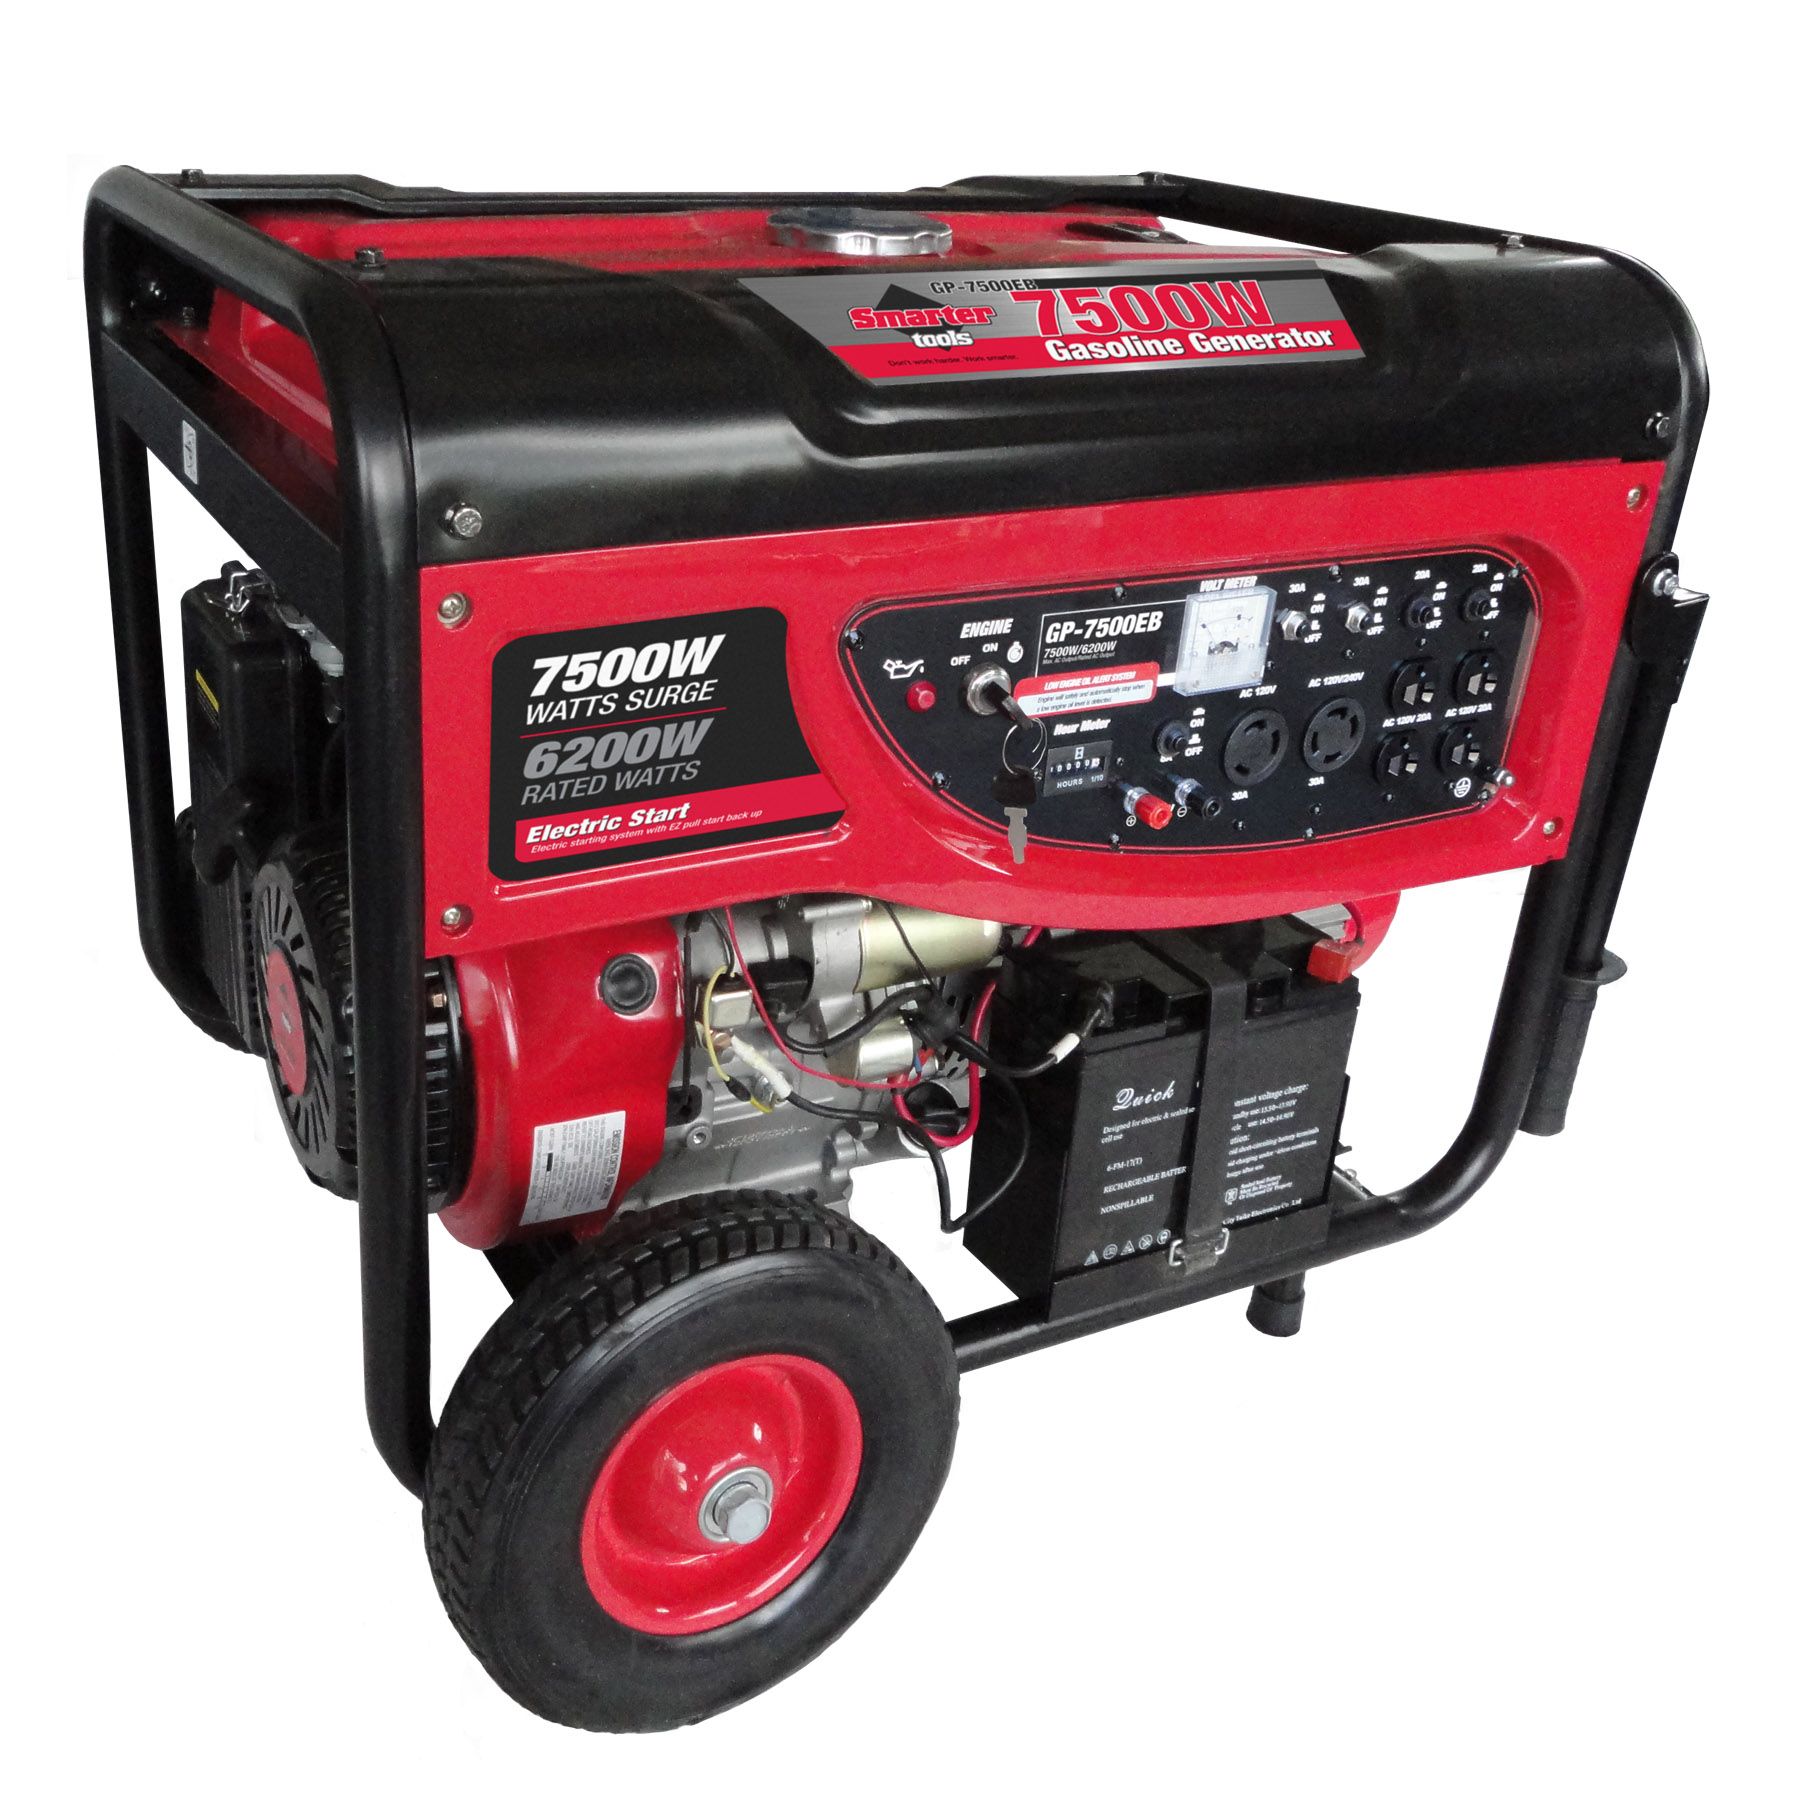 Smarter Tools ST-GP7500EB 7500 Watt Portable Gas Generator with Electric Start  Battery and No Flat Wheels - EPA and CARB Approved.